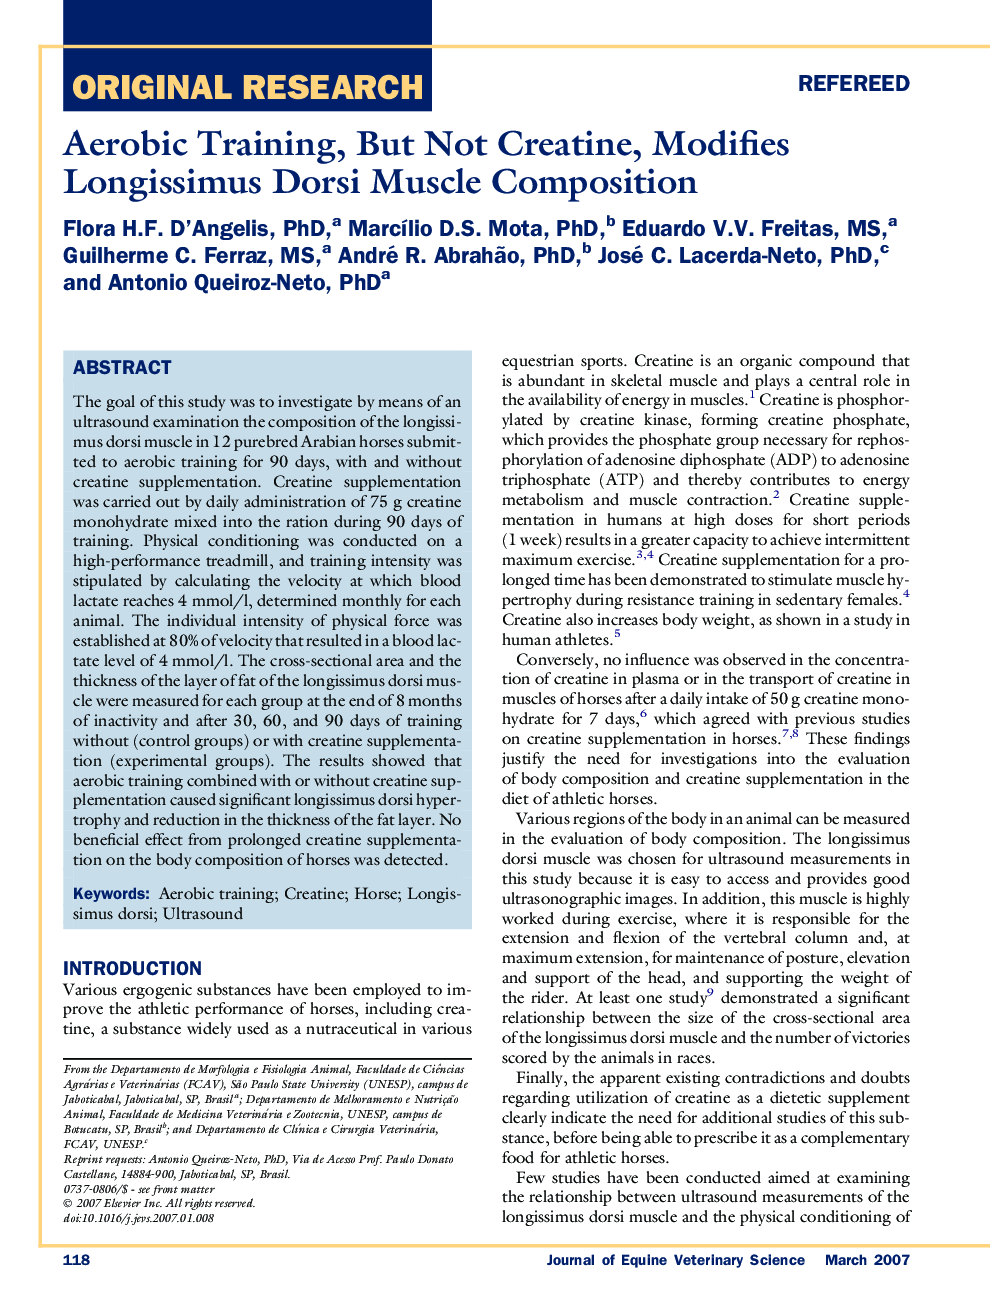 Aerobic Training, But Not Creatine, Modifies Longissimus Dorsi Muscle Composition 